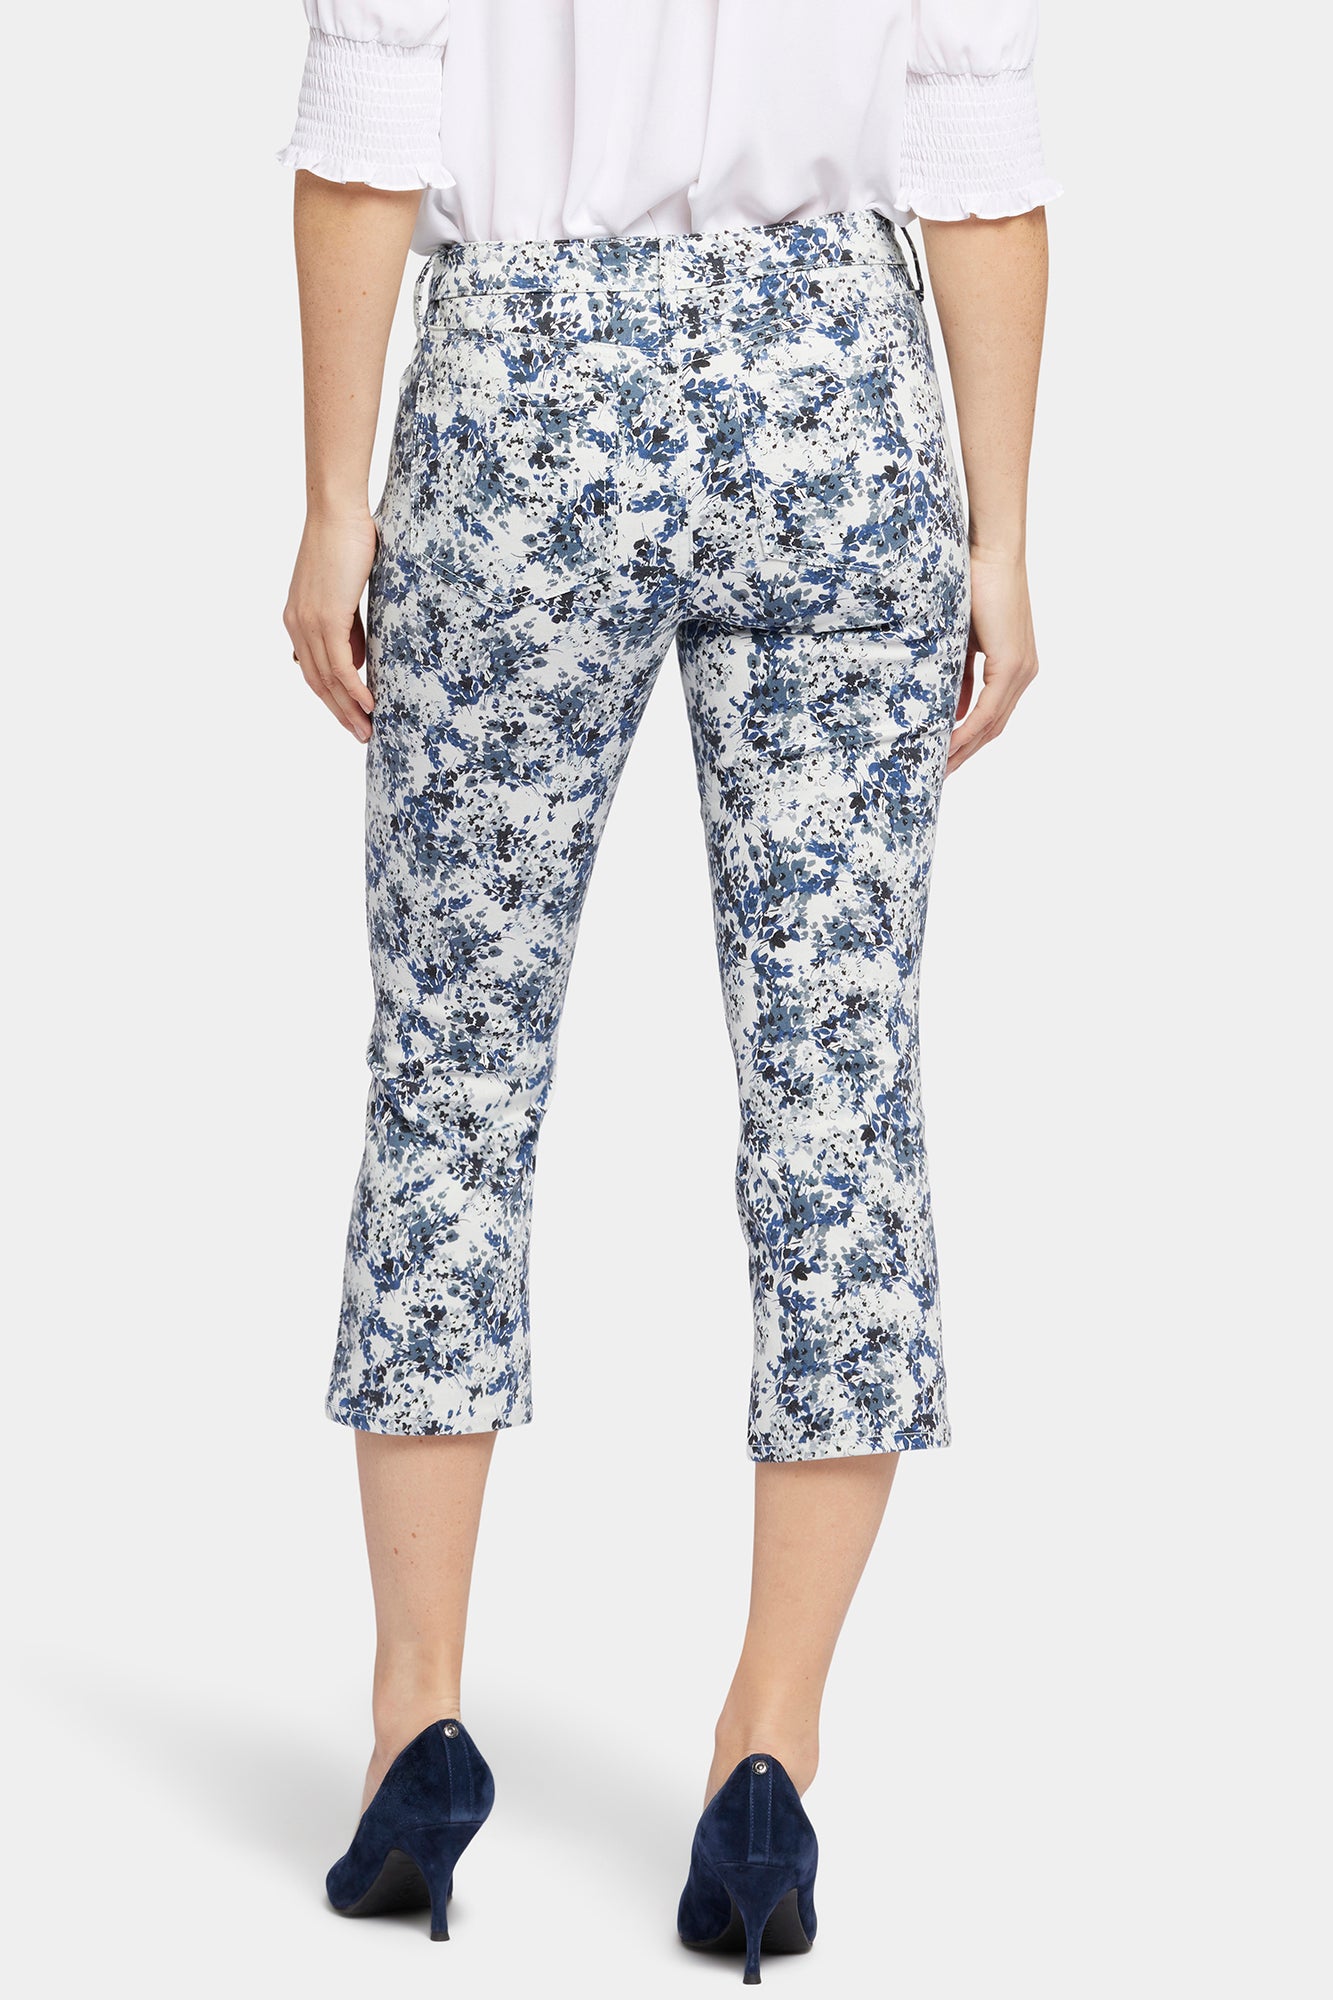 NYDJ Chloe Capri Jeans With Side Slits - Forest Lagoon